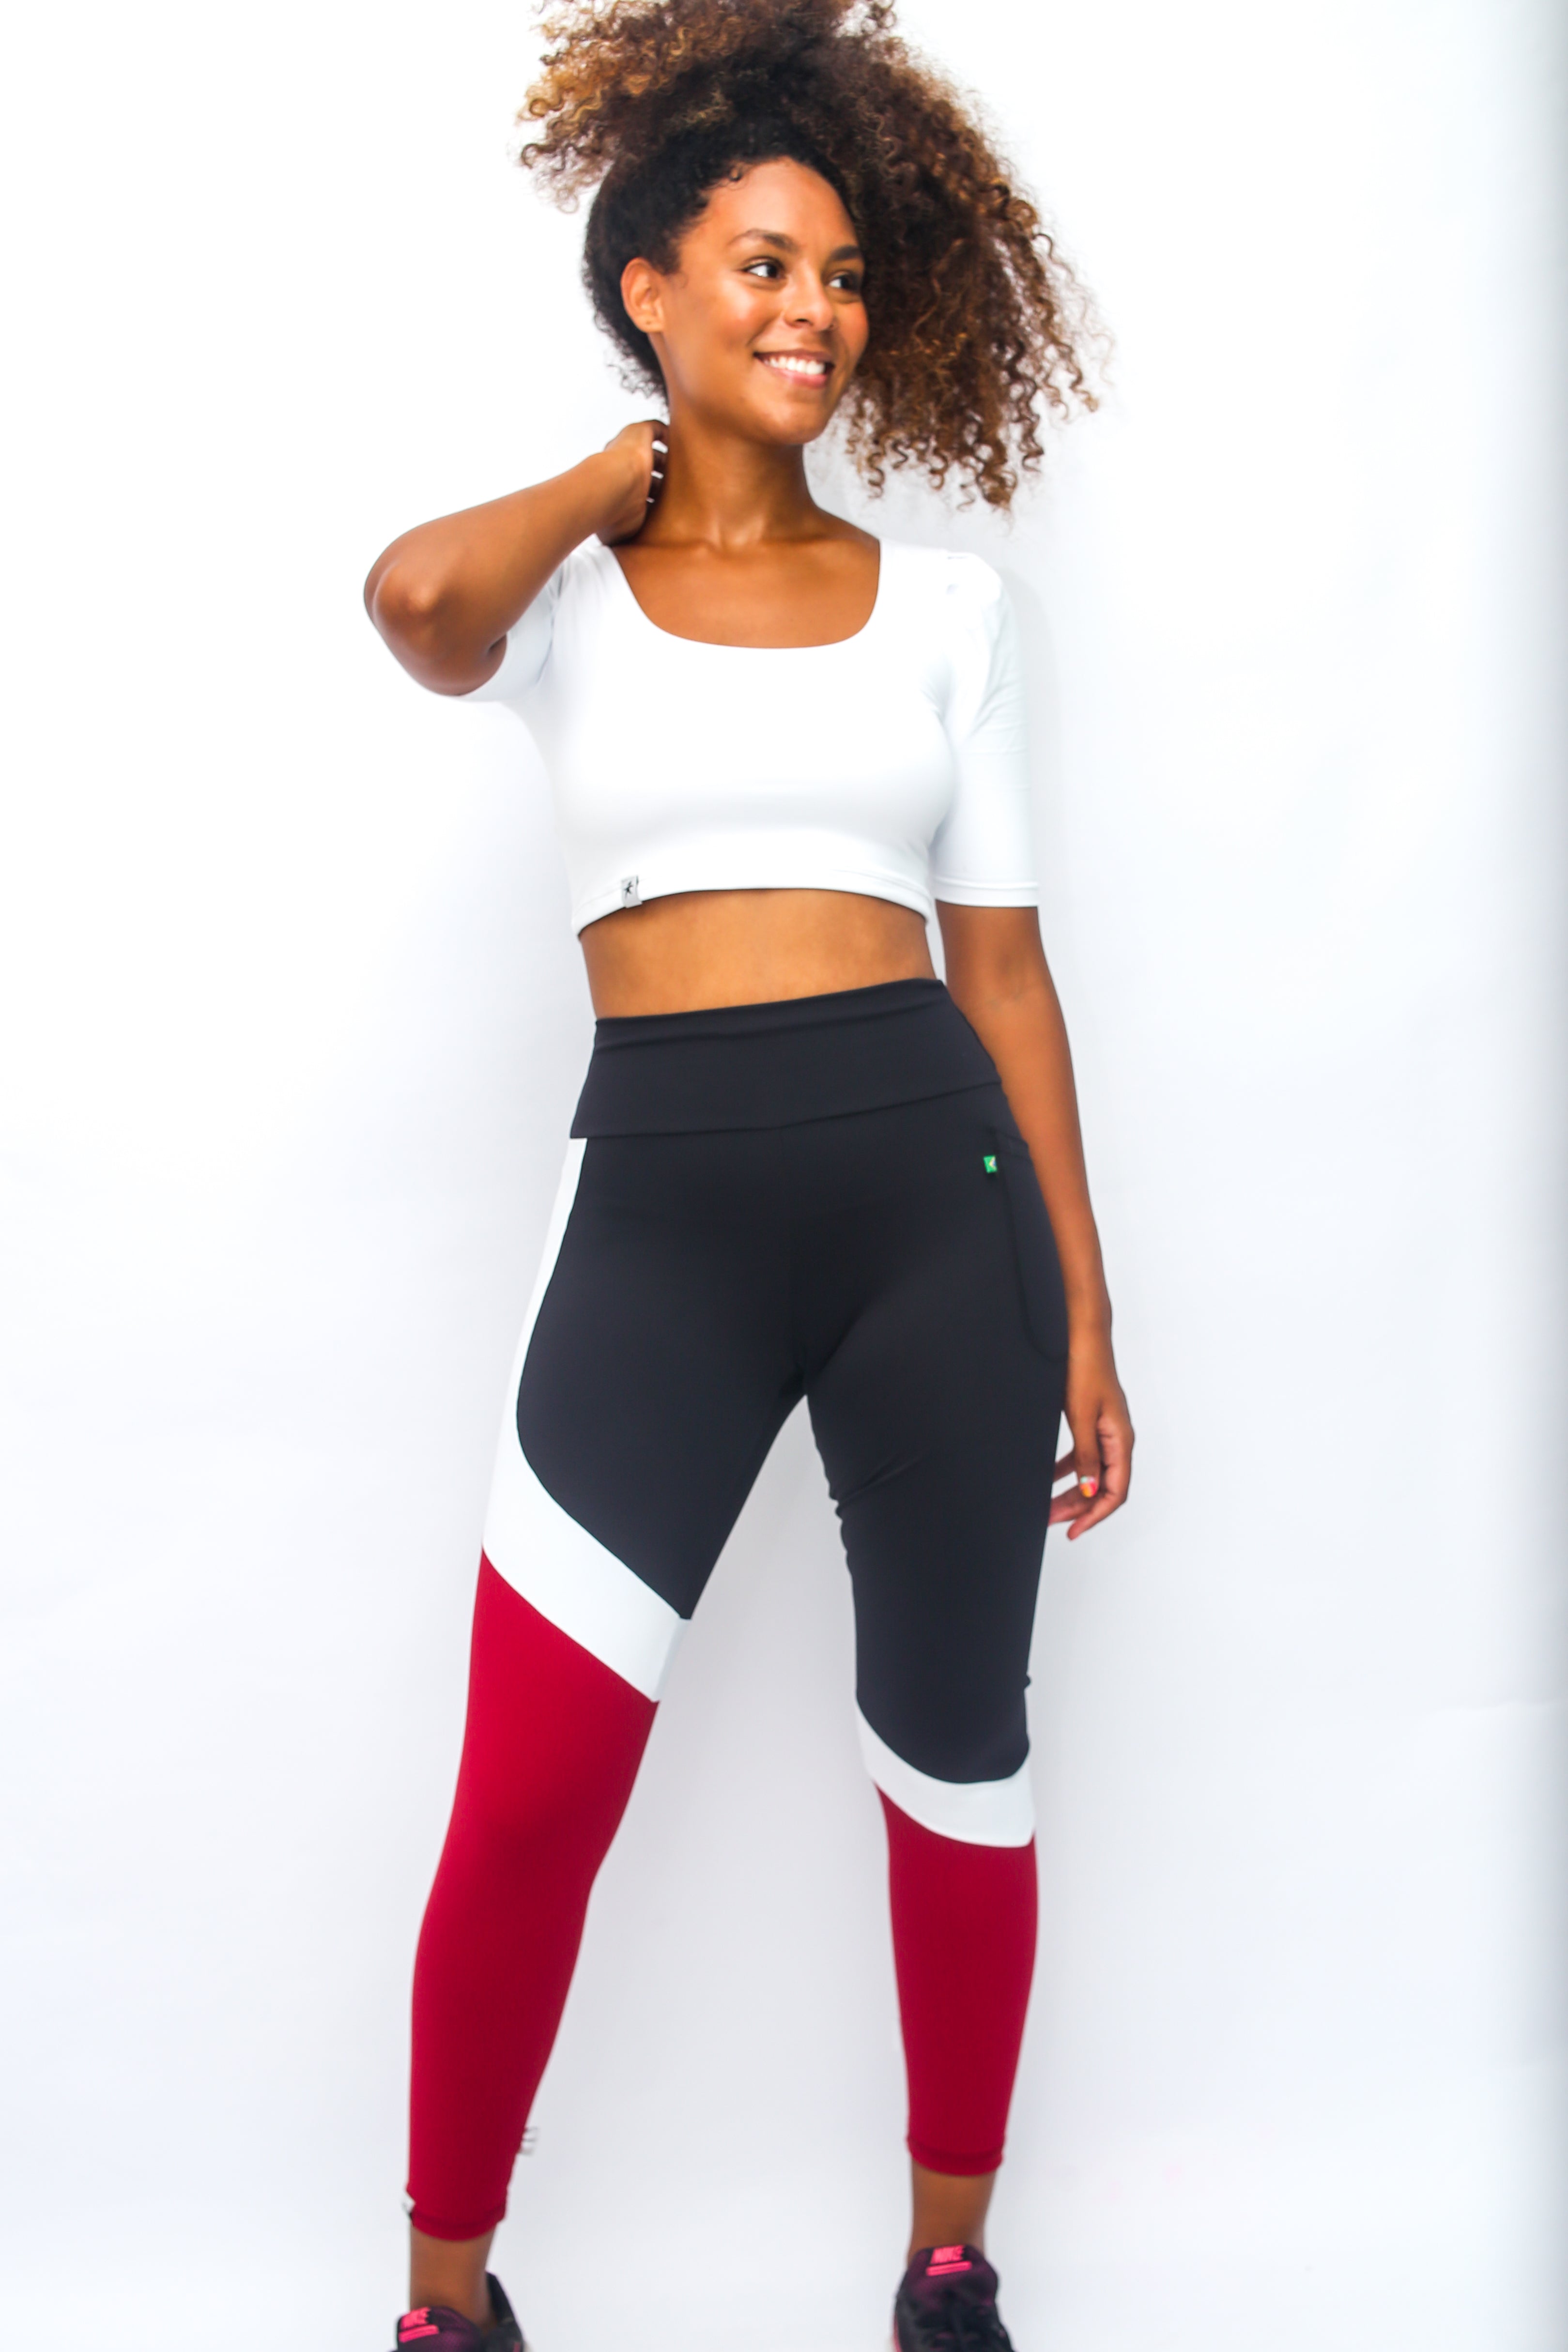 These Adidas Leggings Are as Low as $8 in Amazon New Year Sales - Parade